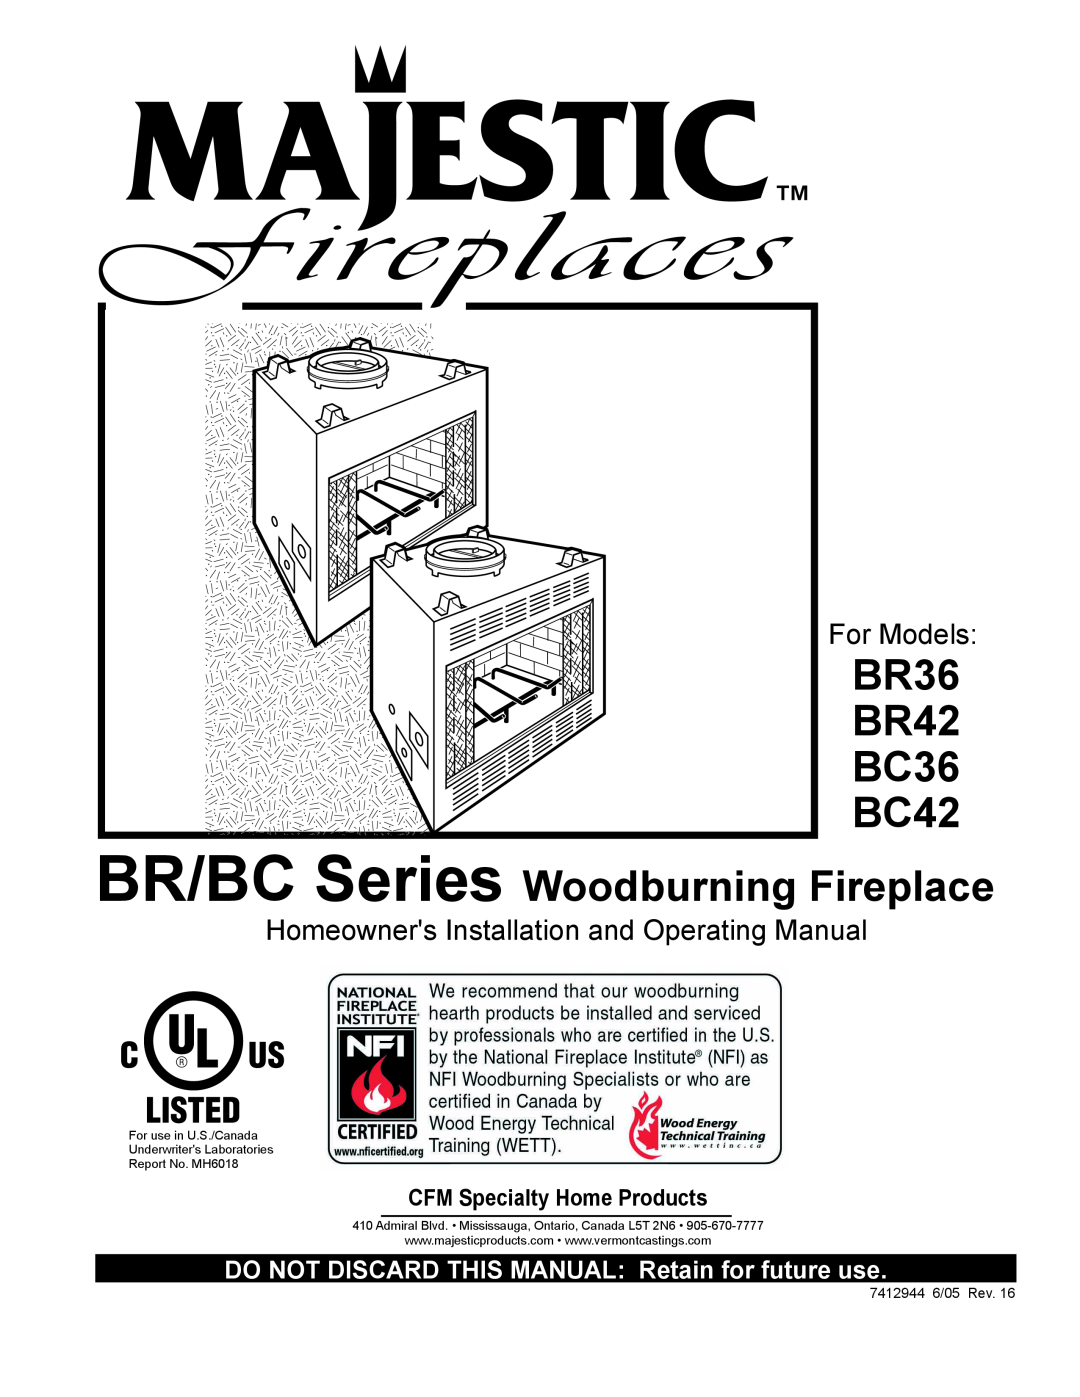 Vermont Casting manual BR36 BR42 BC36 BC42, BR/BC Series Woodburning Fireplace, CFM Specialty Home Products, For Models 